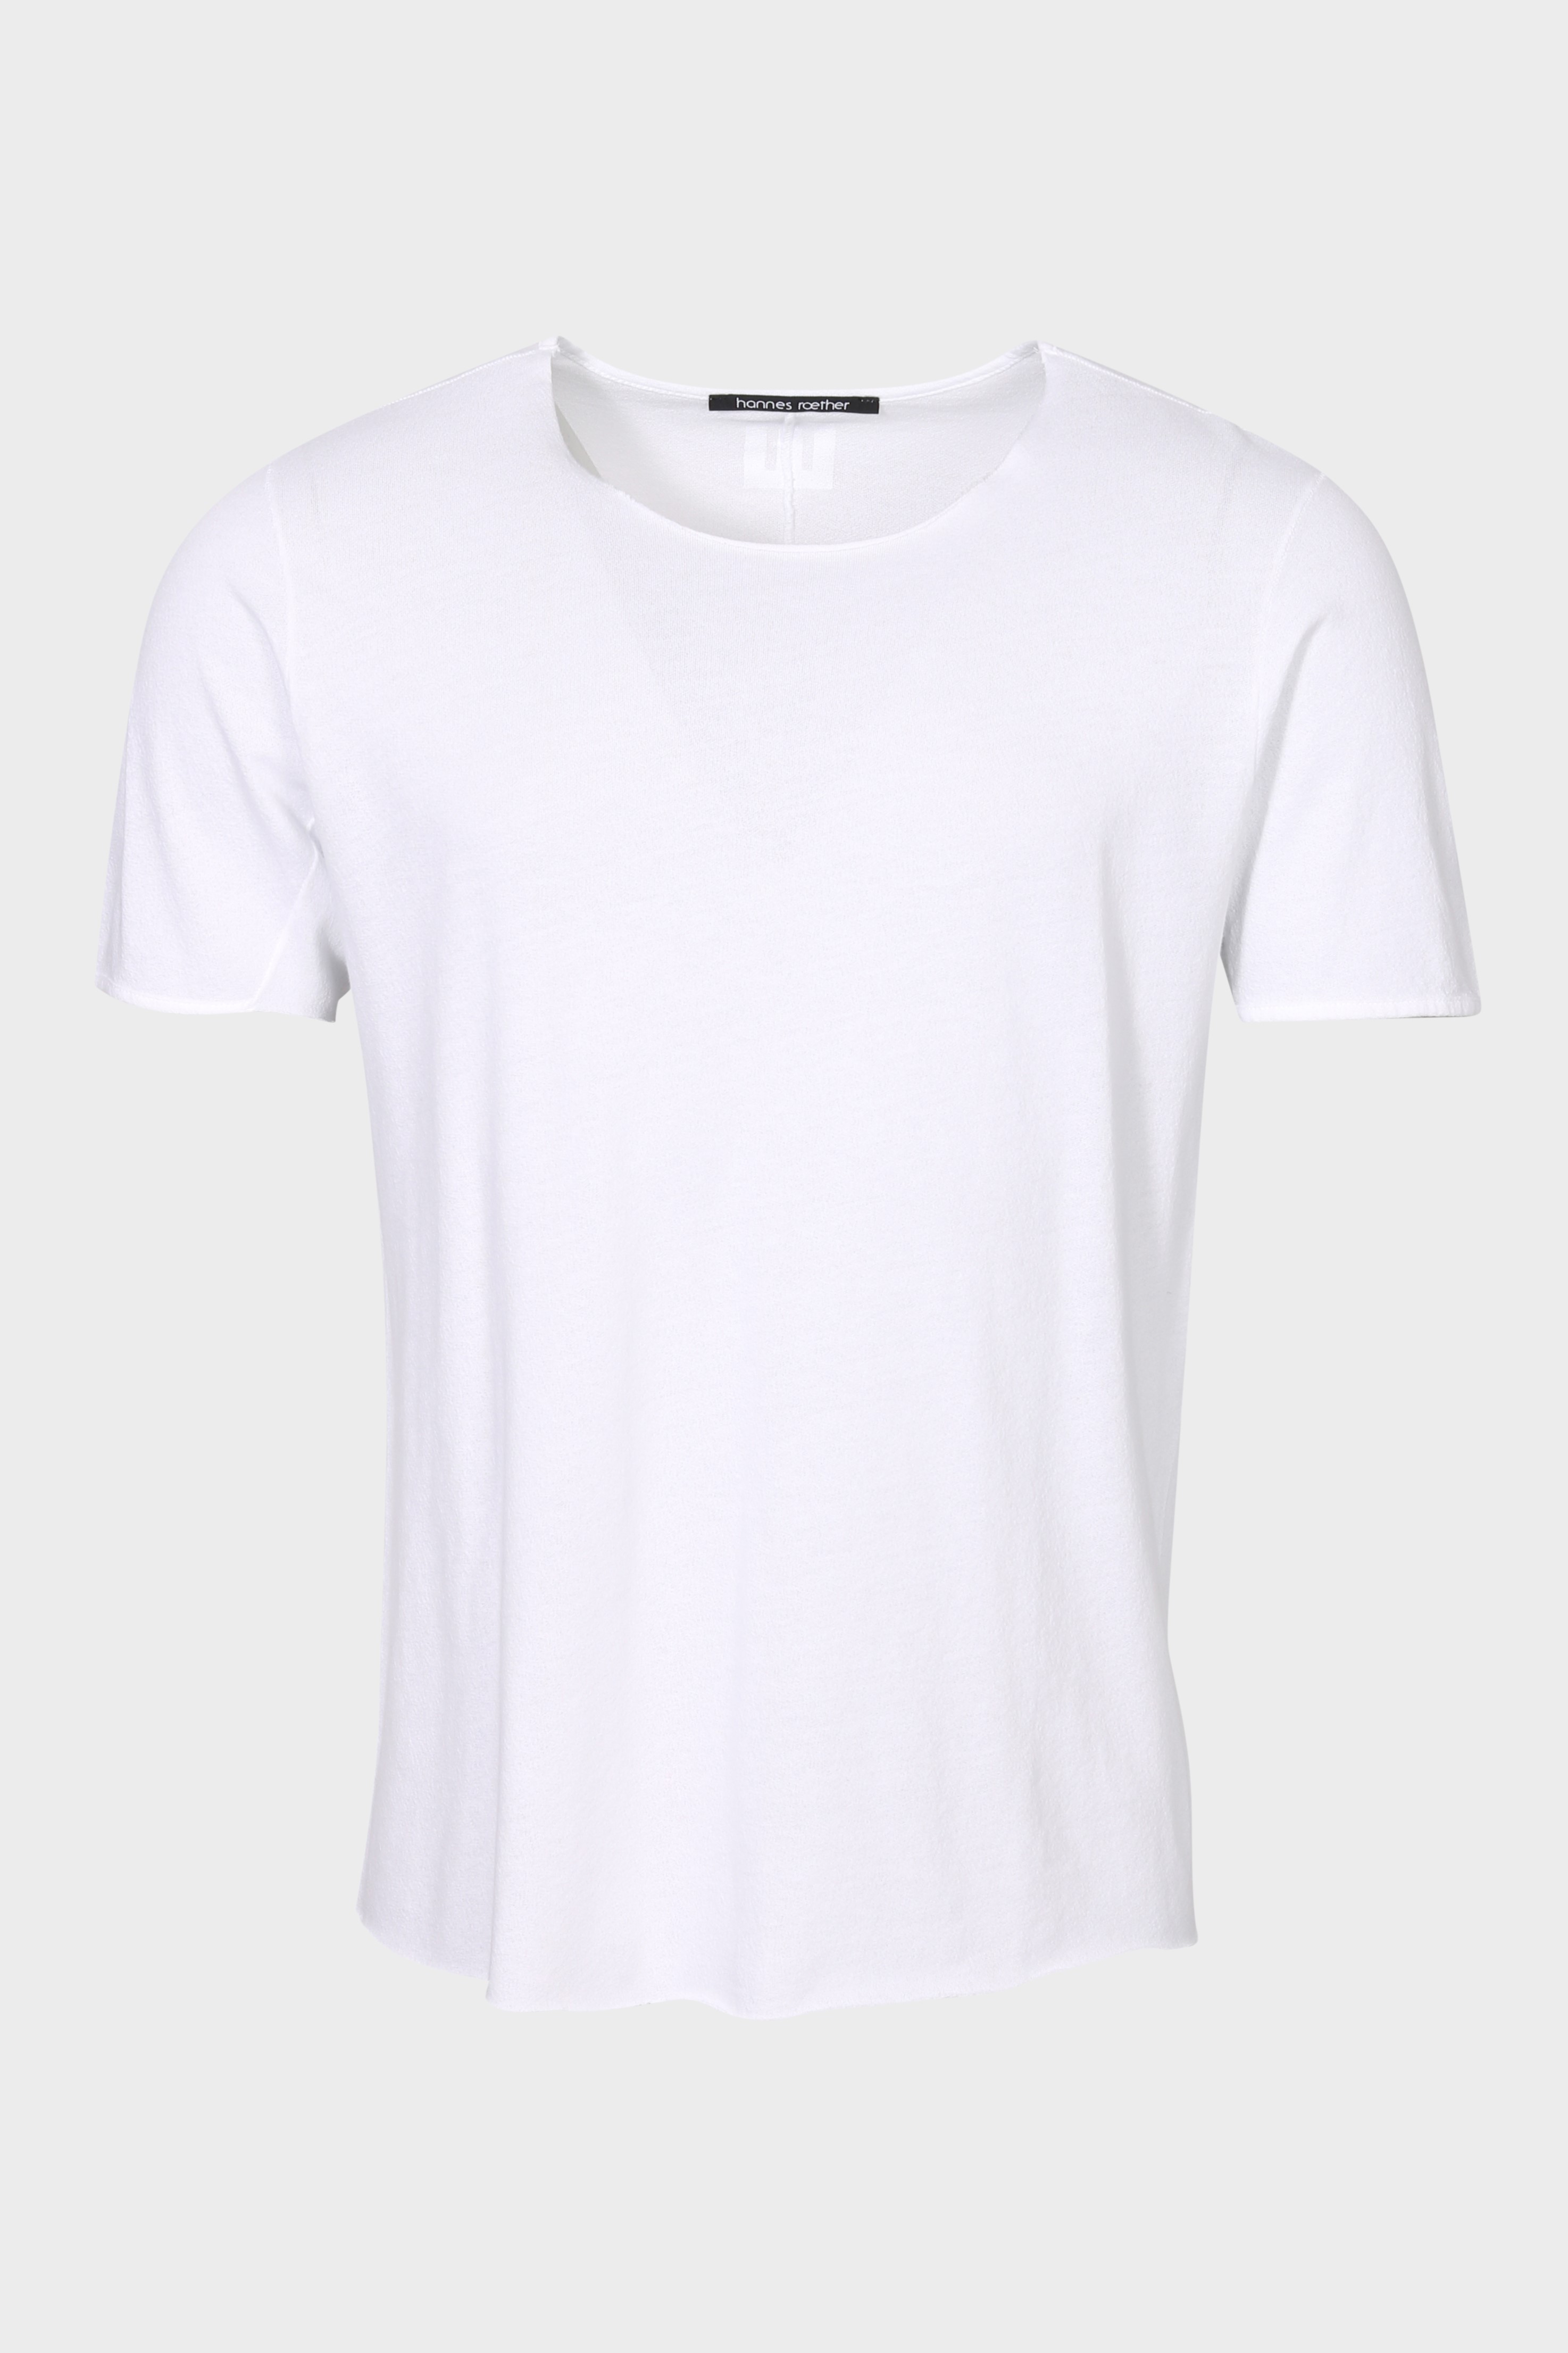 HANNES ROETHER T-Shirt in White M